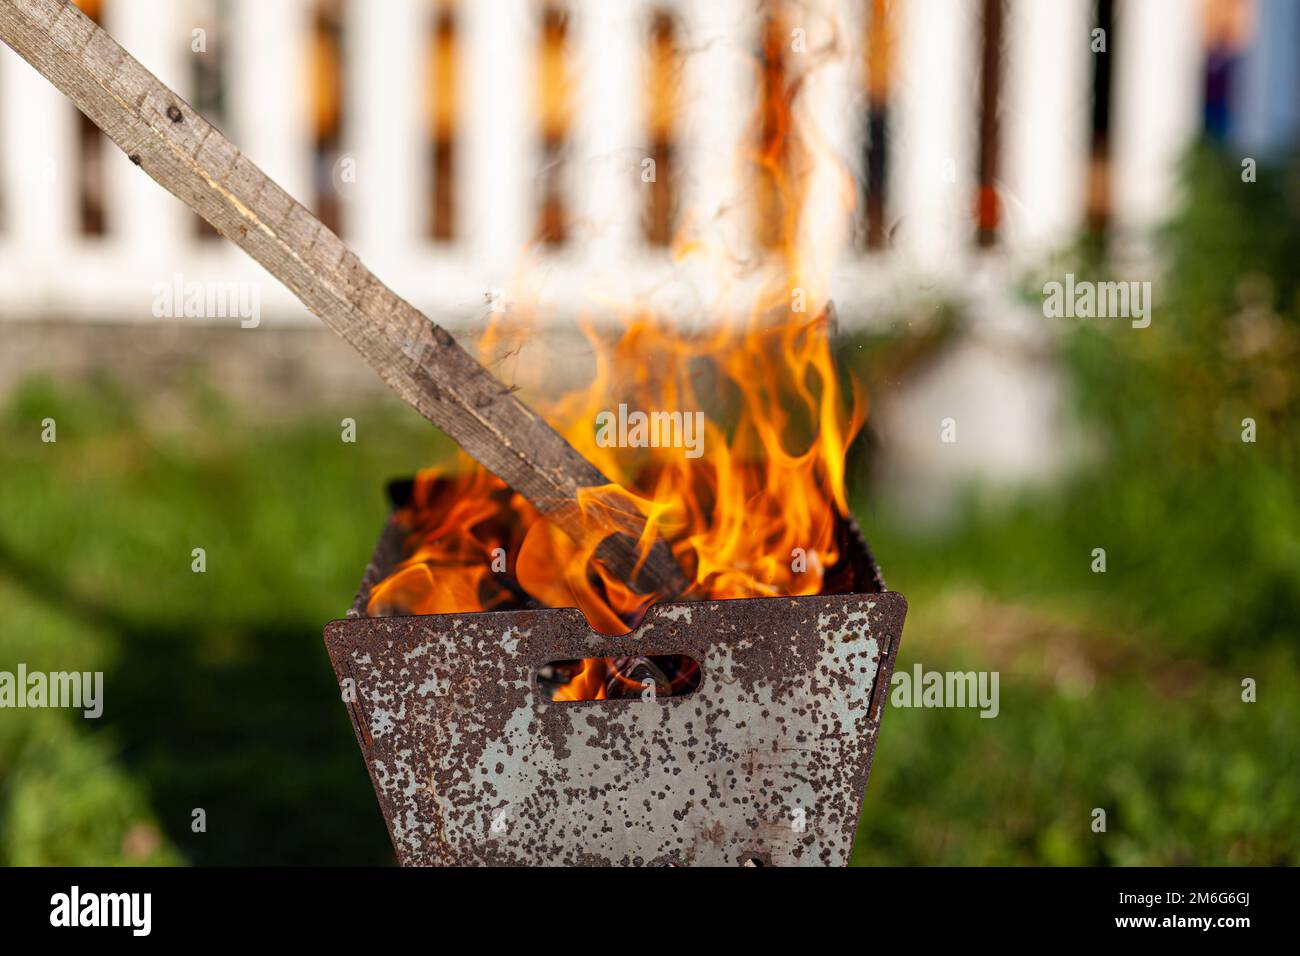 The firewood in the grill burns with a bright orange flame of fire Stock Photo